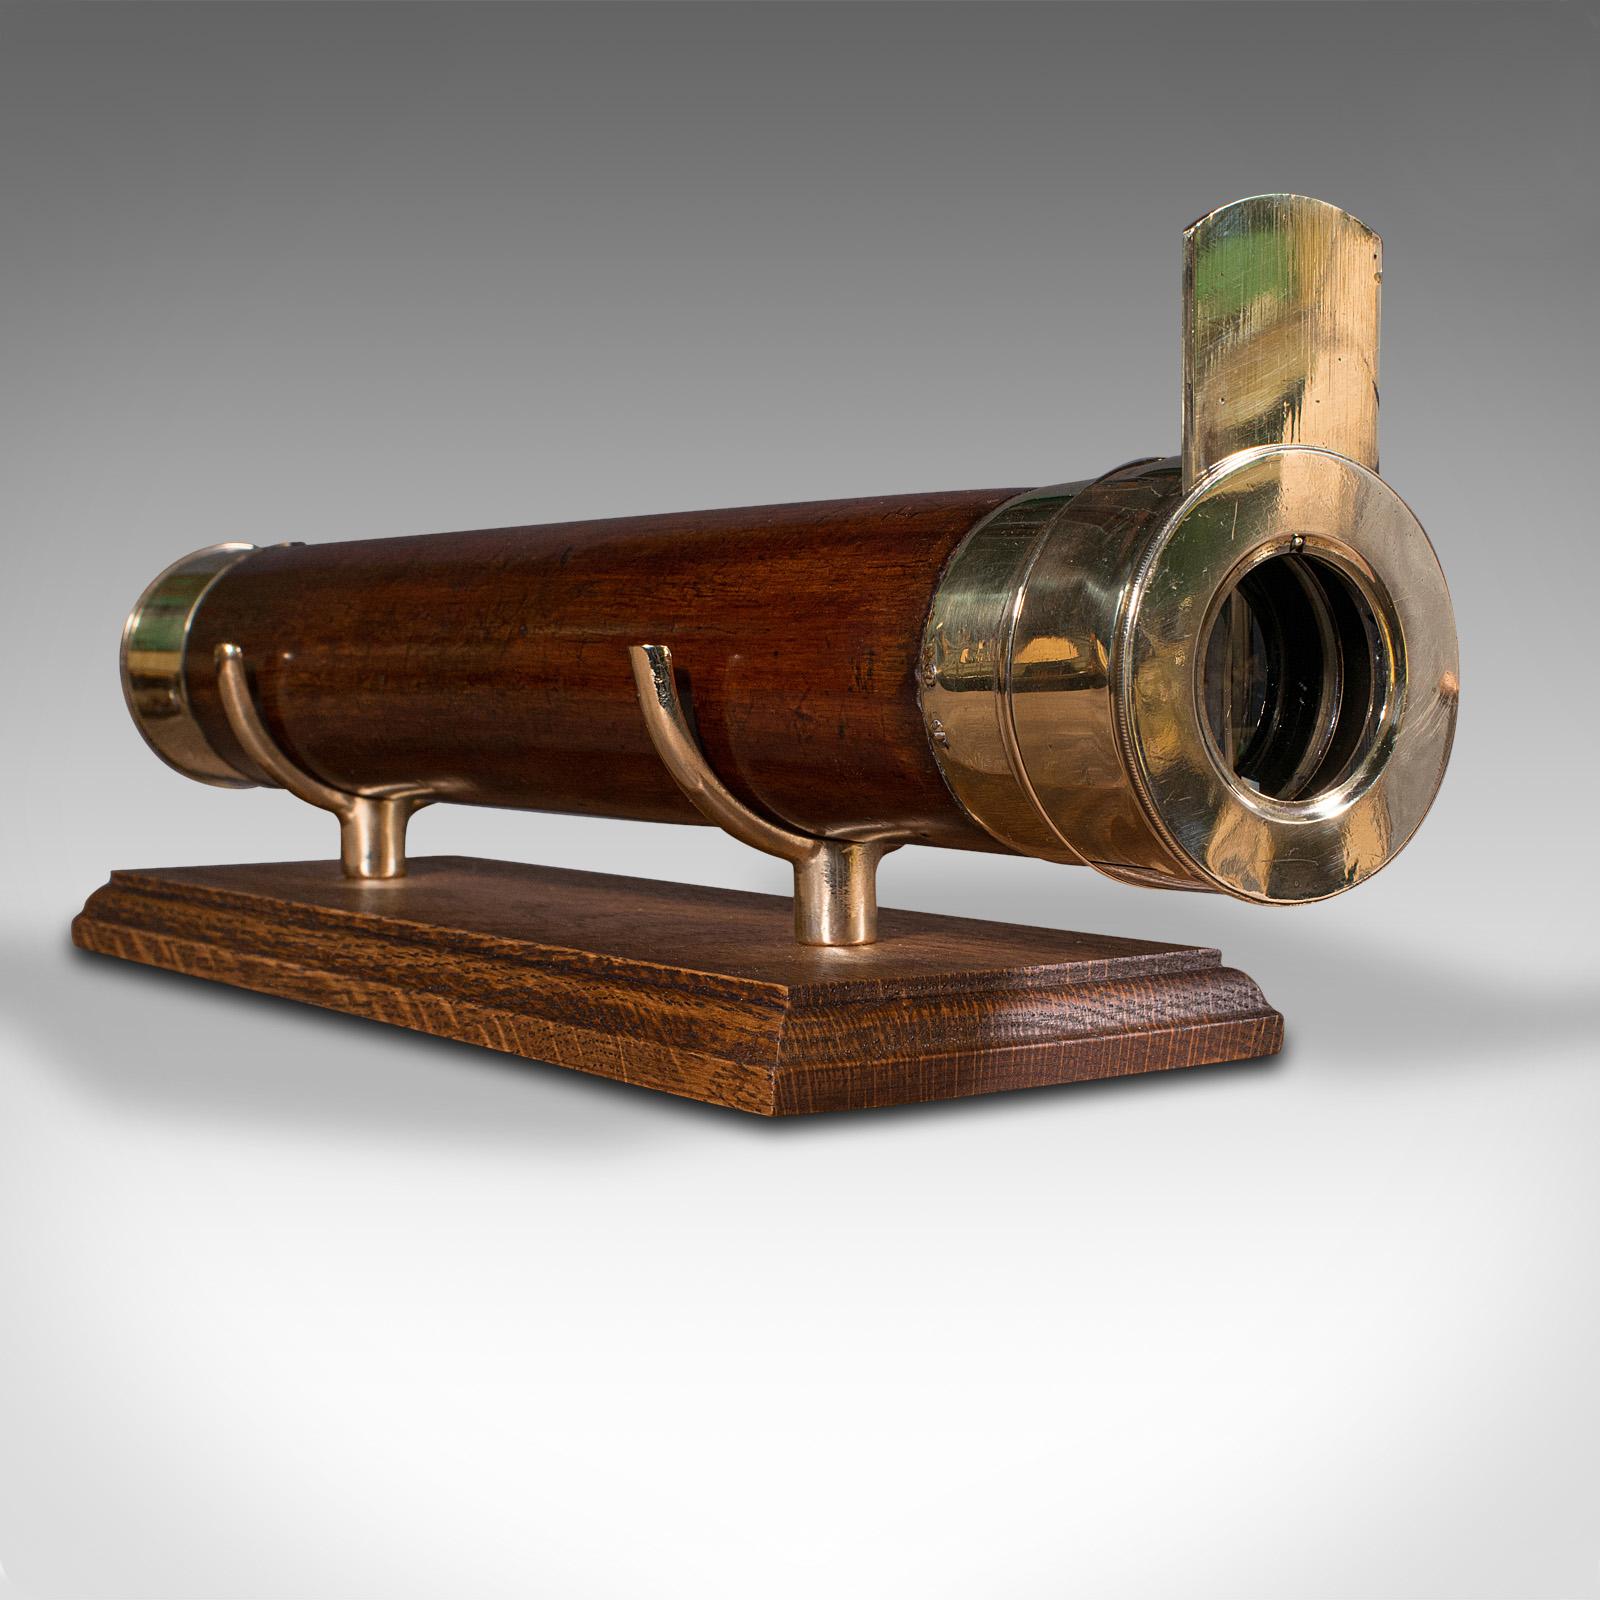 19th Century Antique Two Draw Telescope, English, Terrestrial, Astronomical, Victorian, 1850